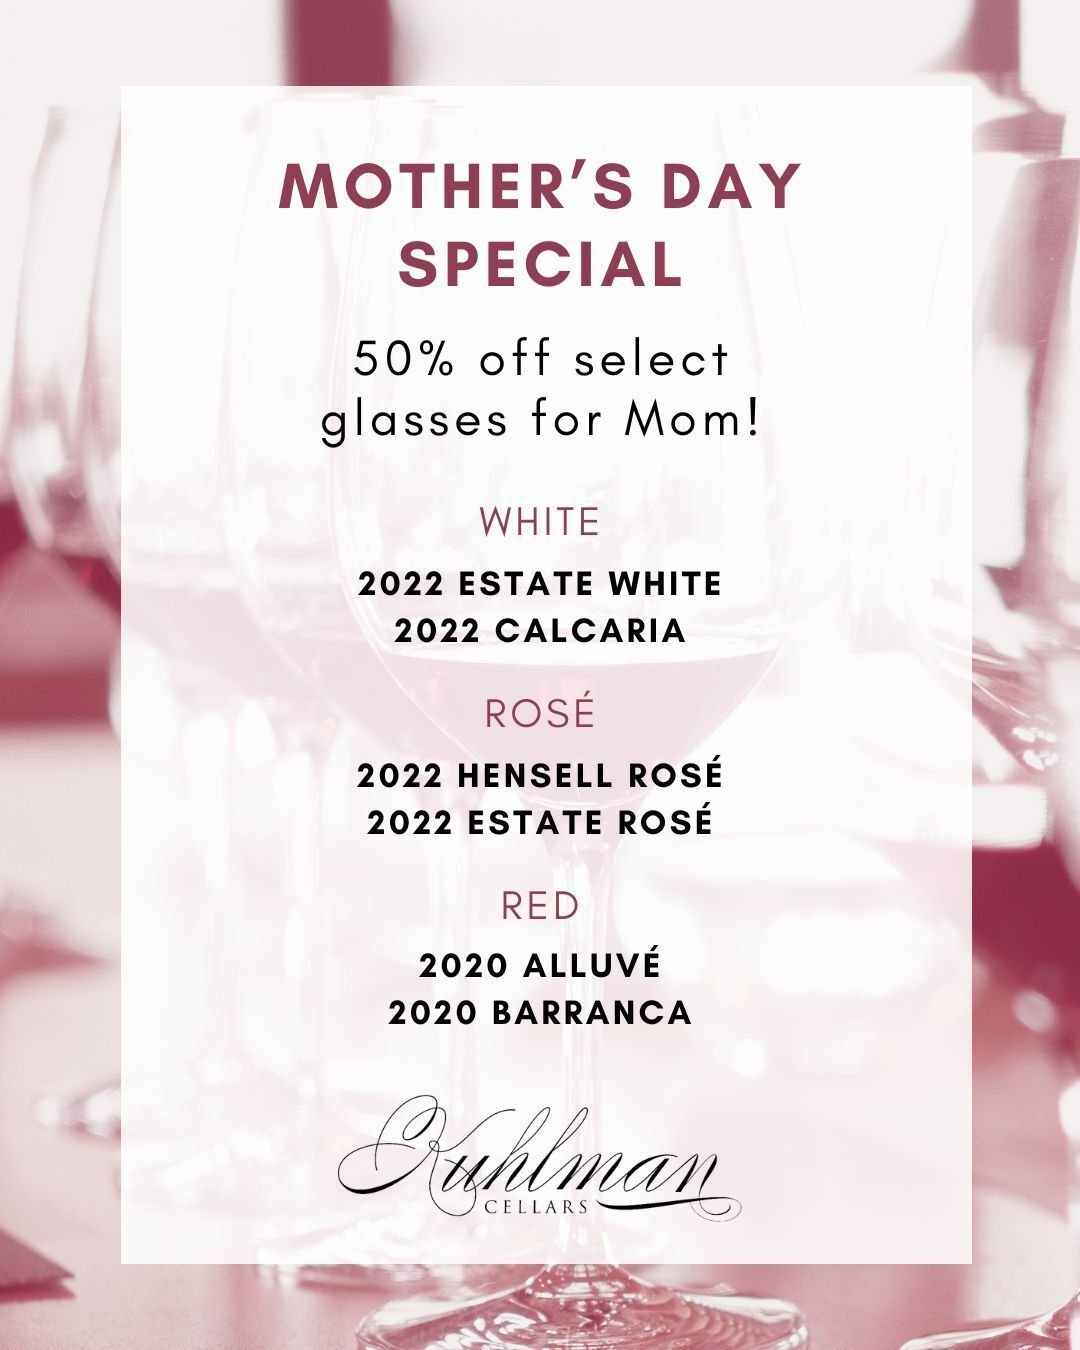 Happy Mother's Day! Come celebrate with us. 🥂